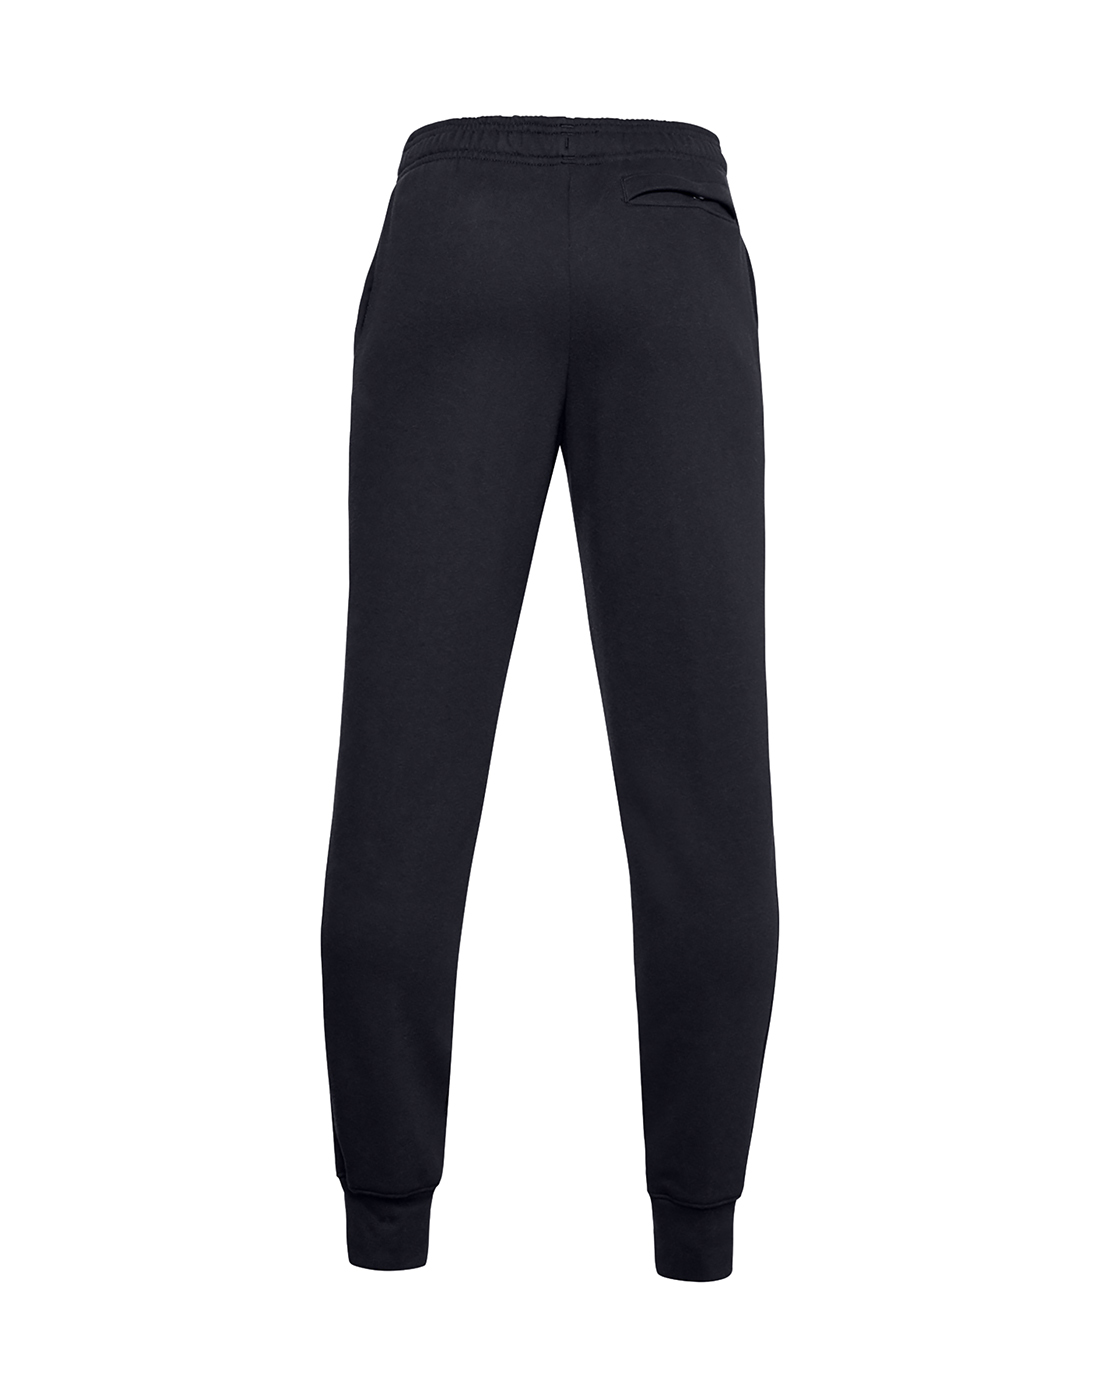 Under Armour Older Boys Rival Fleece Joggers - Black | Life Style Sports IE